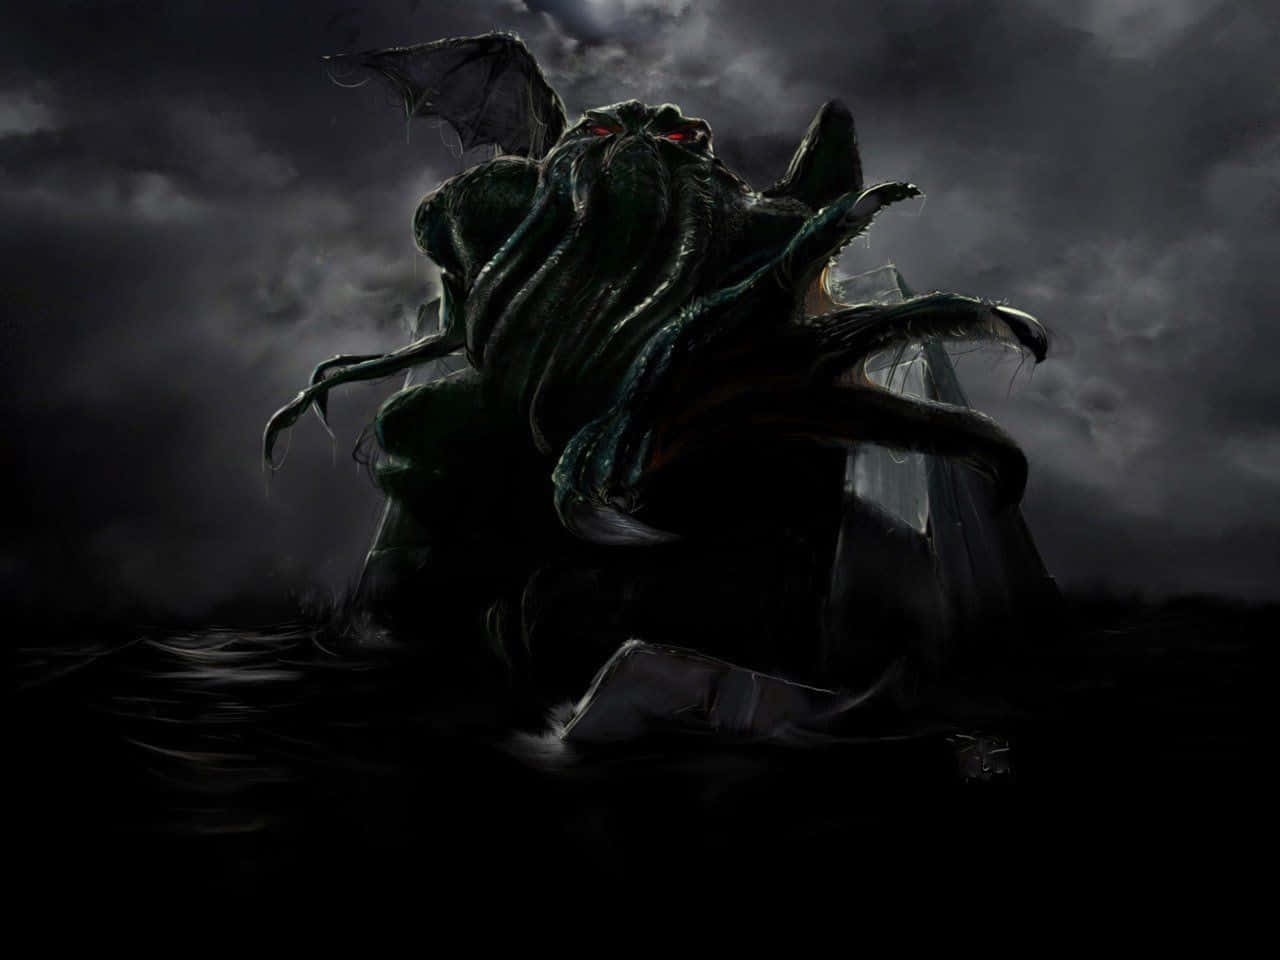 Scary Monster Cthulhu In Ocean Pictures 1280 x 960 Picture